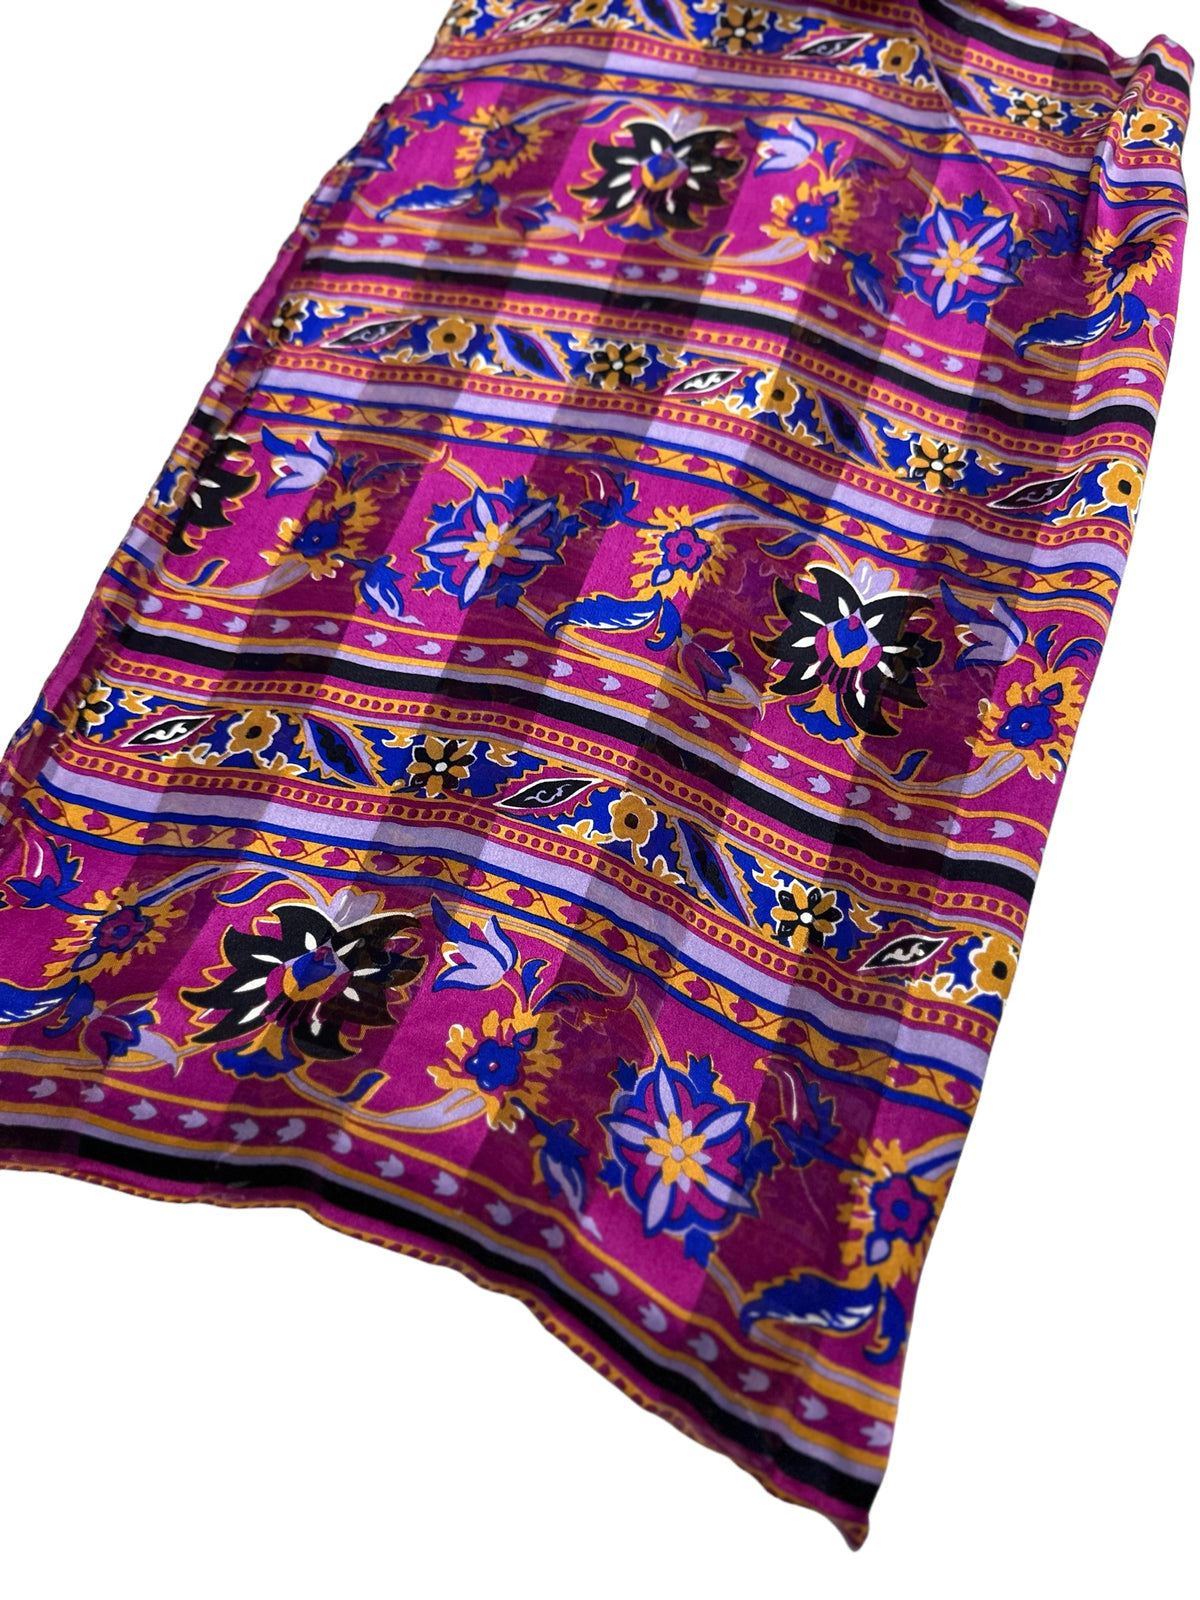 NEW! Floral & Linear Silk Scarves